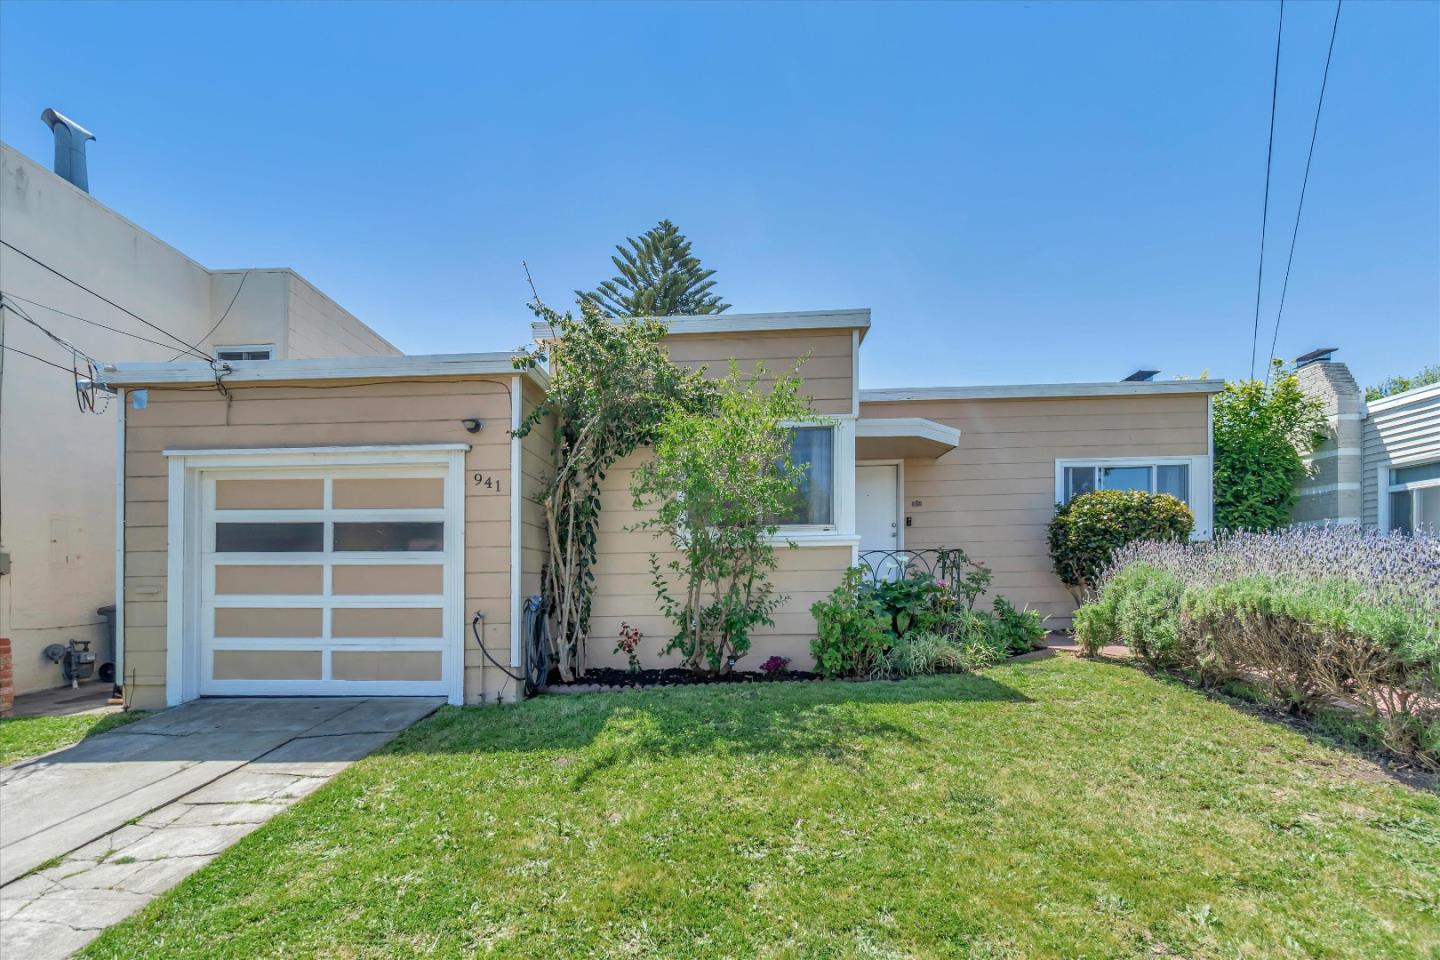 Photo of 941 Mills Ave in San Bruno, CA